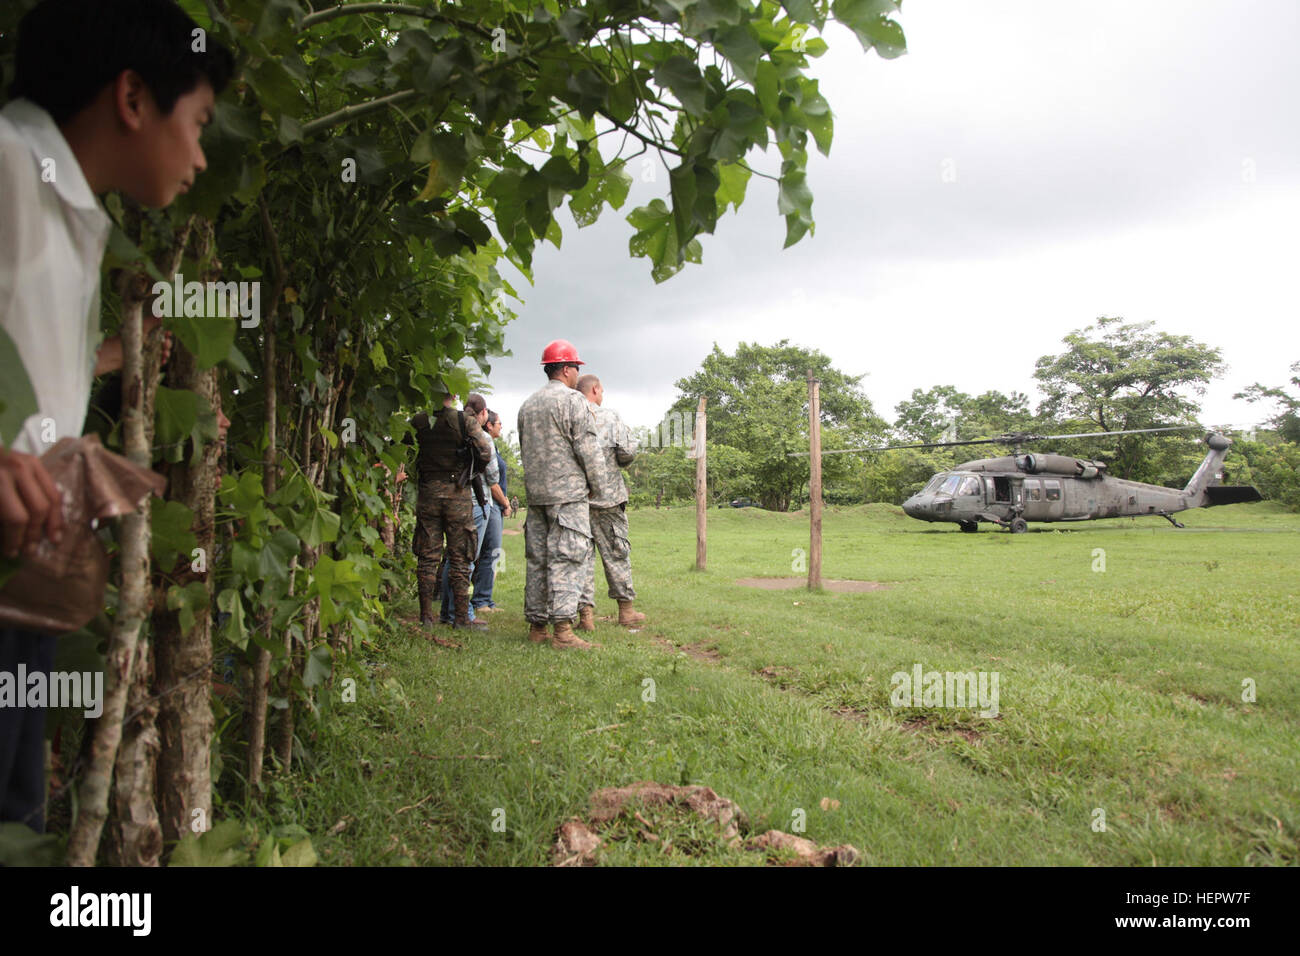 Guatemalan citizens watch as U.S. Army Brig. Gen. Keith Klemmer's, the Arkansas deputy adjutant general, UH-60 Black Hawk helicopter, take off at Catarina construction site, Guatemala, June 8, 2016. Task Force Red Wolf and Army South conducts Humanitarian Civil Assistance Training to include tactical level construction projects and Medical Readiness Training Exercises providing medical access and building schools in Guatemala with the Guatemalan Government and non-government agencies from 05MAR16 to 18JUN16 in order to improve the mission readiness of US forces and to provide a lasting benefit Stock Photo